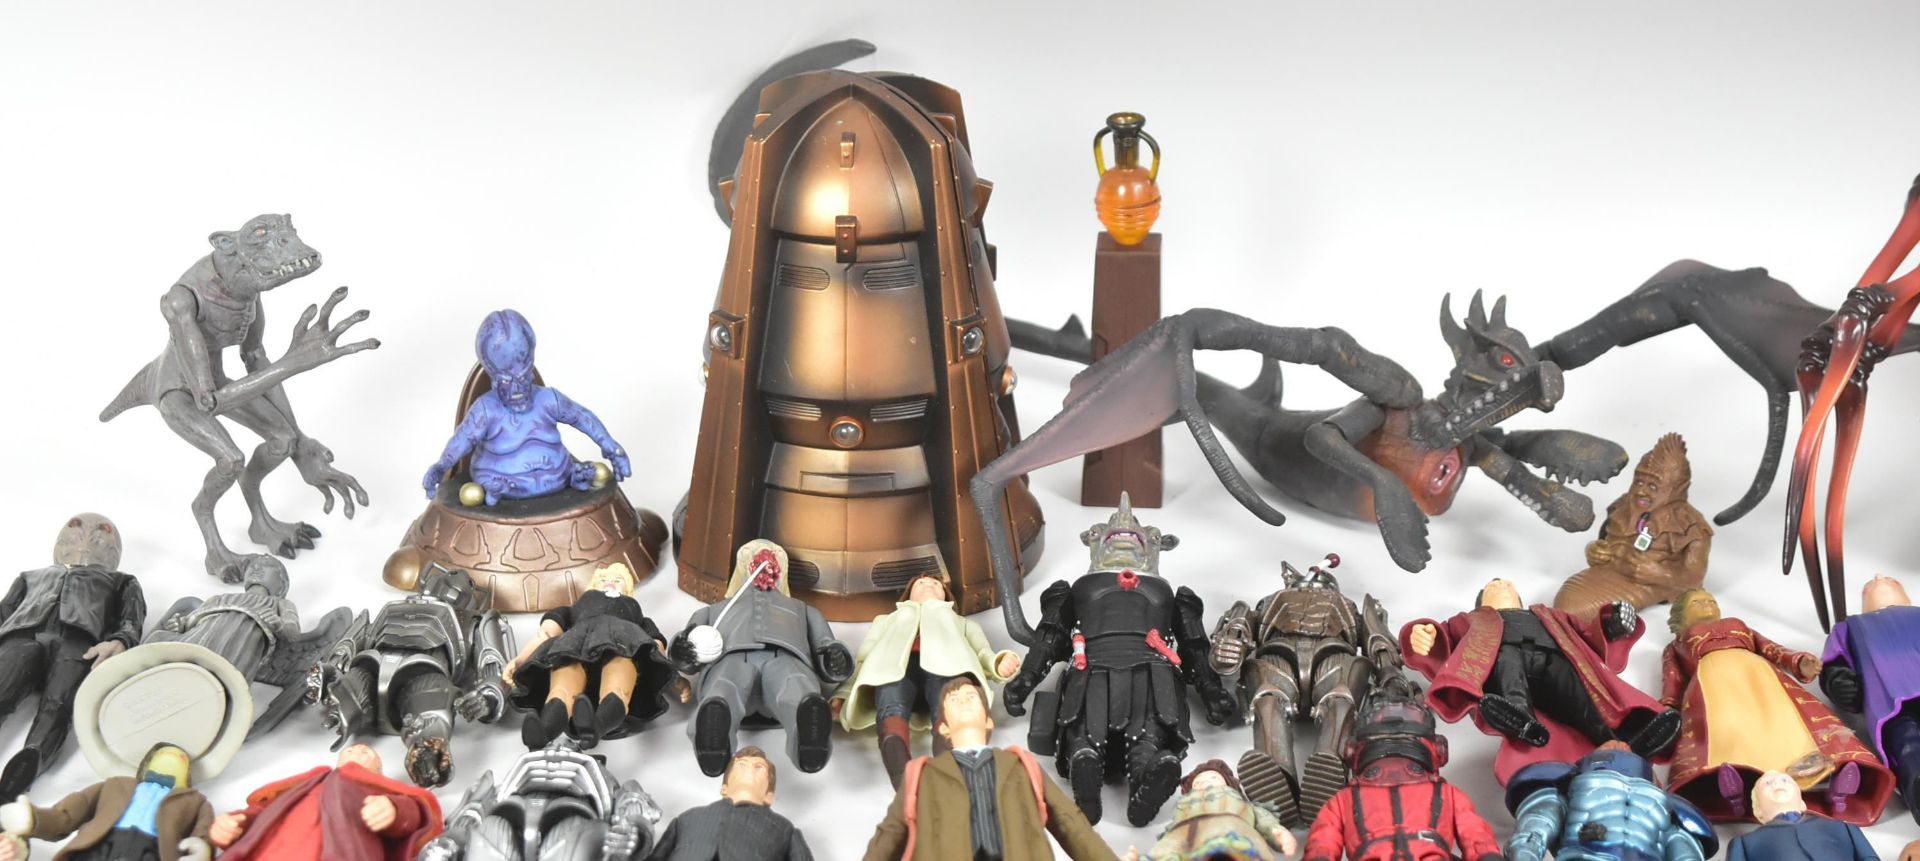 DOCTOR WHO - CHARACTER OPTIONS - ACTION FIGURES - Image 5 of 10